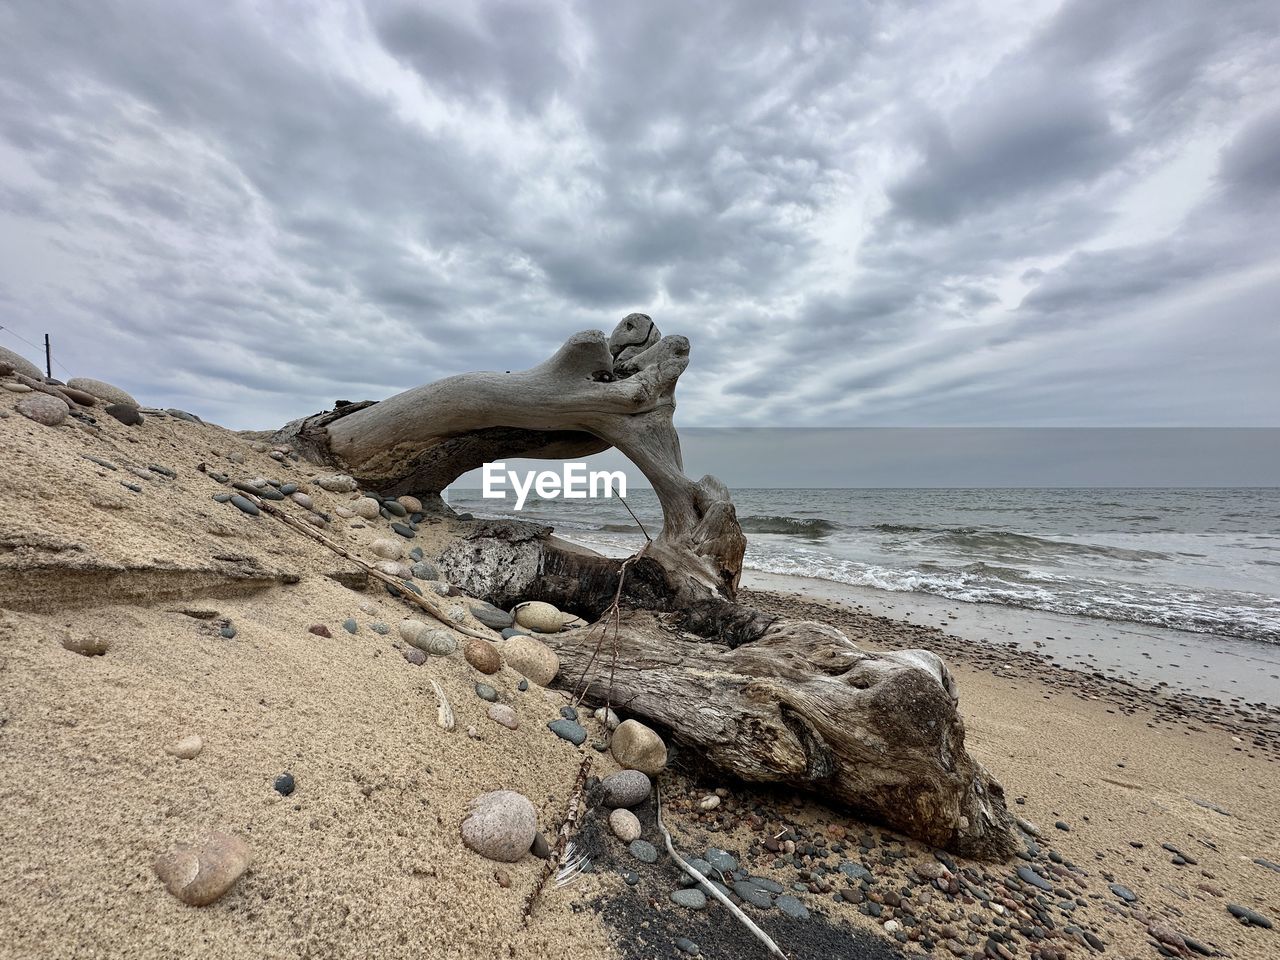 rock, land, sky, sea, beach, sand, cloud, water, nature, coast, shore, beauty in nature, no people, scenics - nature, ocean, driftwood, day, tranquility, animal, outdoors, wave, travel destinations, environment, horizon, horizon over water, statue, animal wildlife, tranquil scene, animal themes, body of water